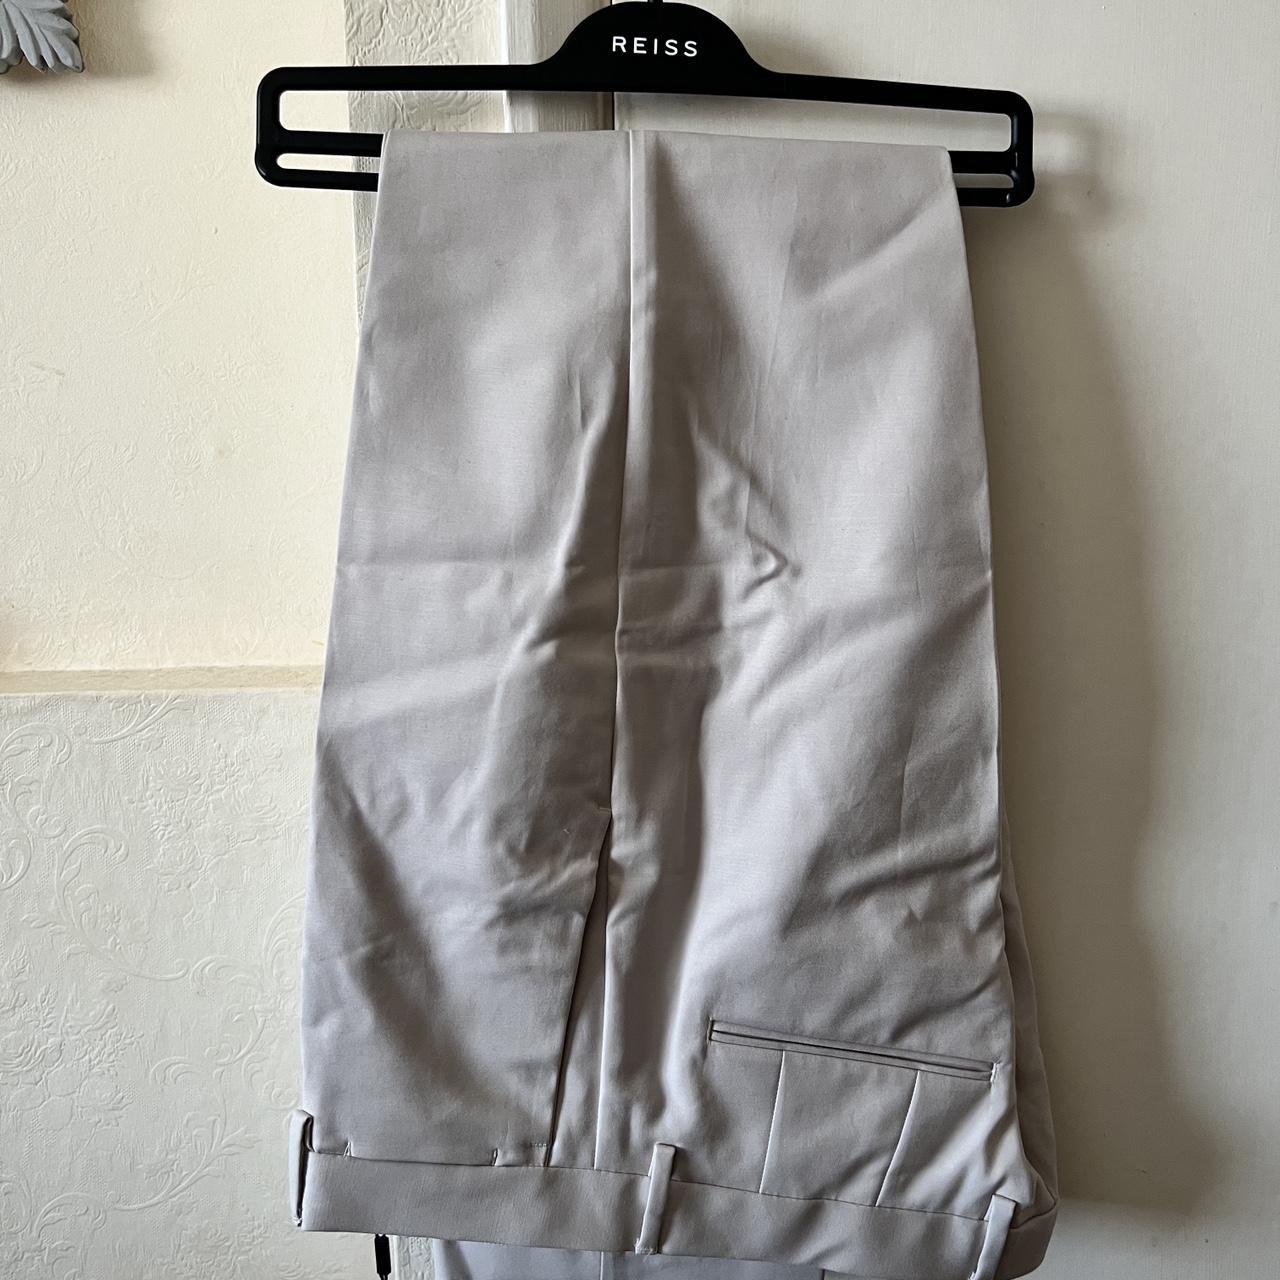 Brand new Reiss chino trousers. Size 34R. Missed... - Depop